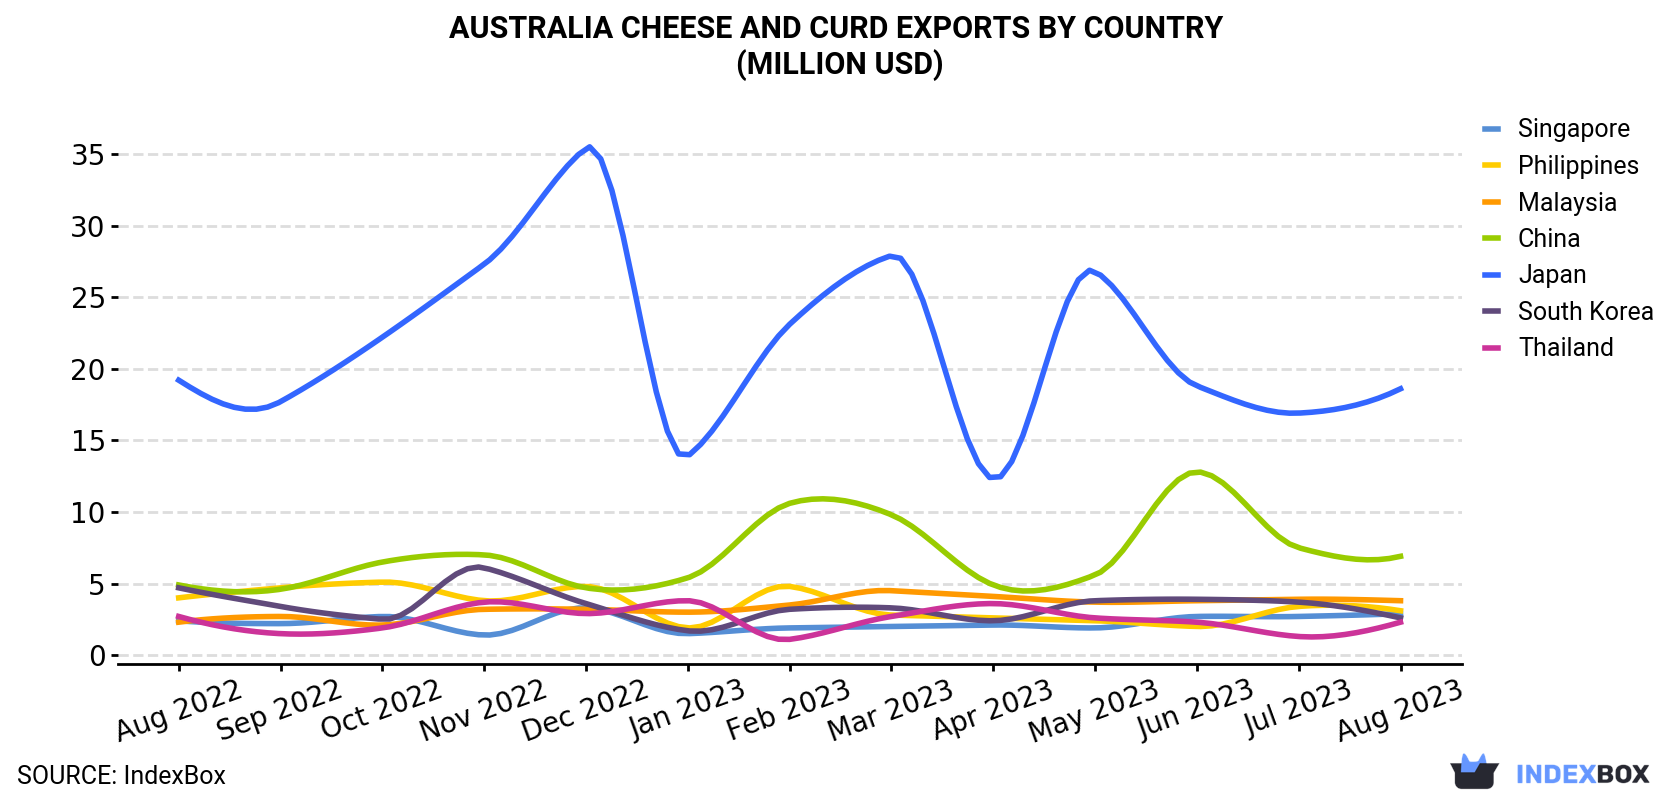 Australia Cheese And Curd Exports By Country (Million USD)